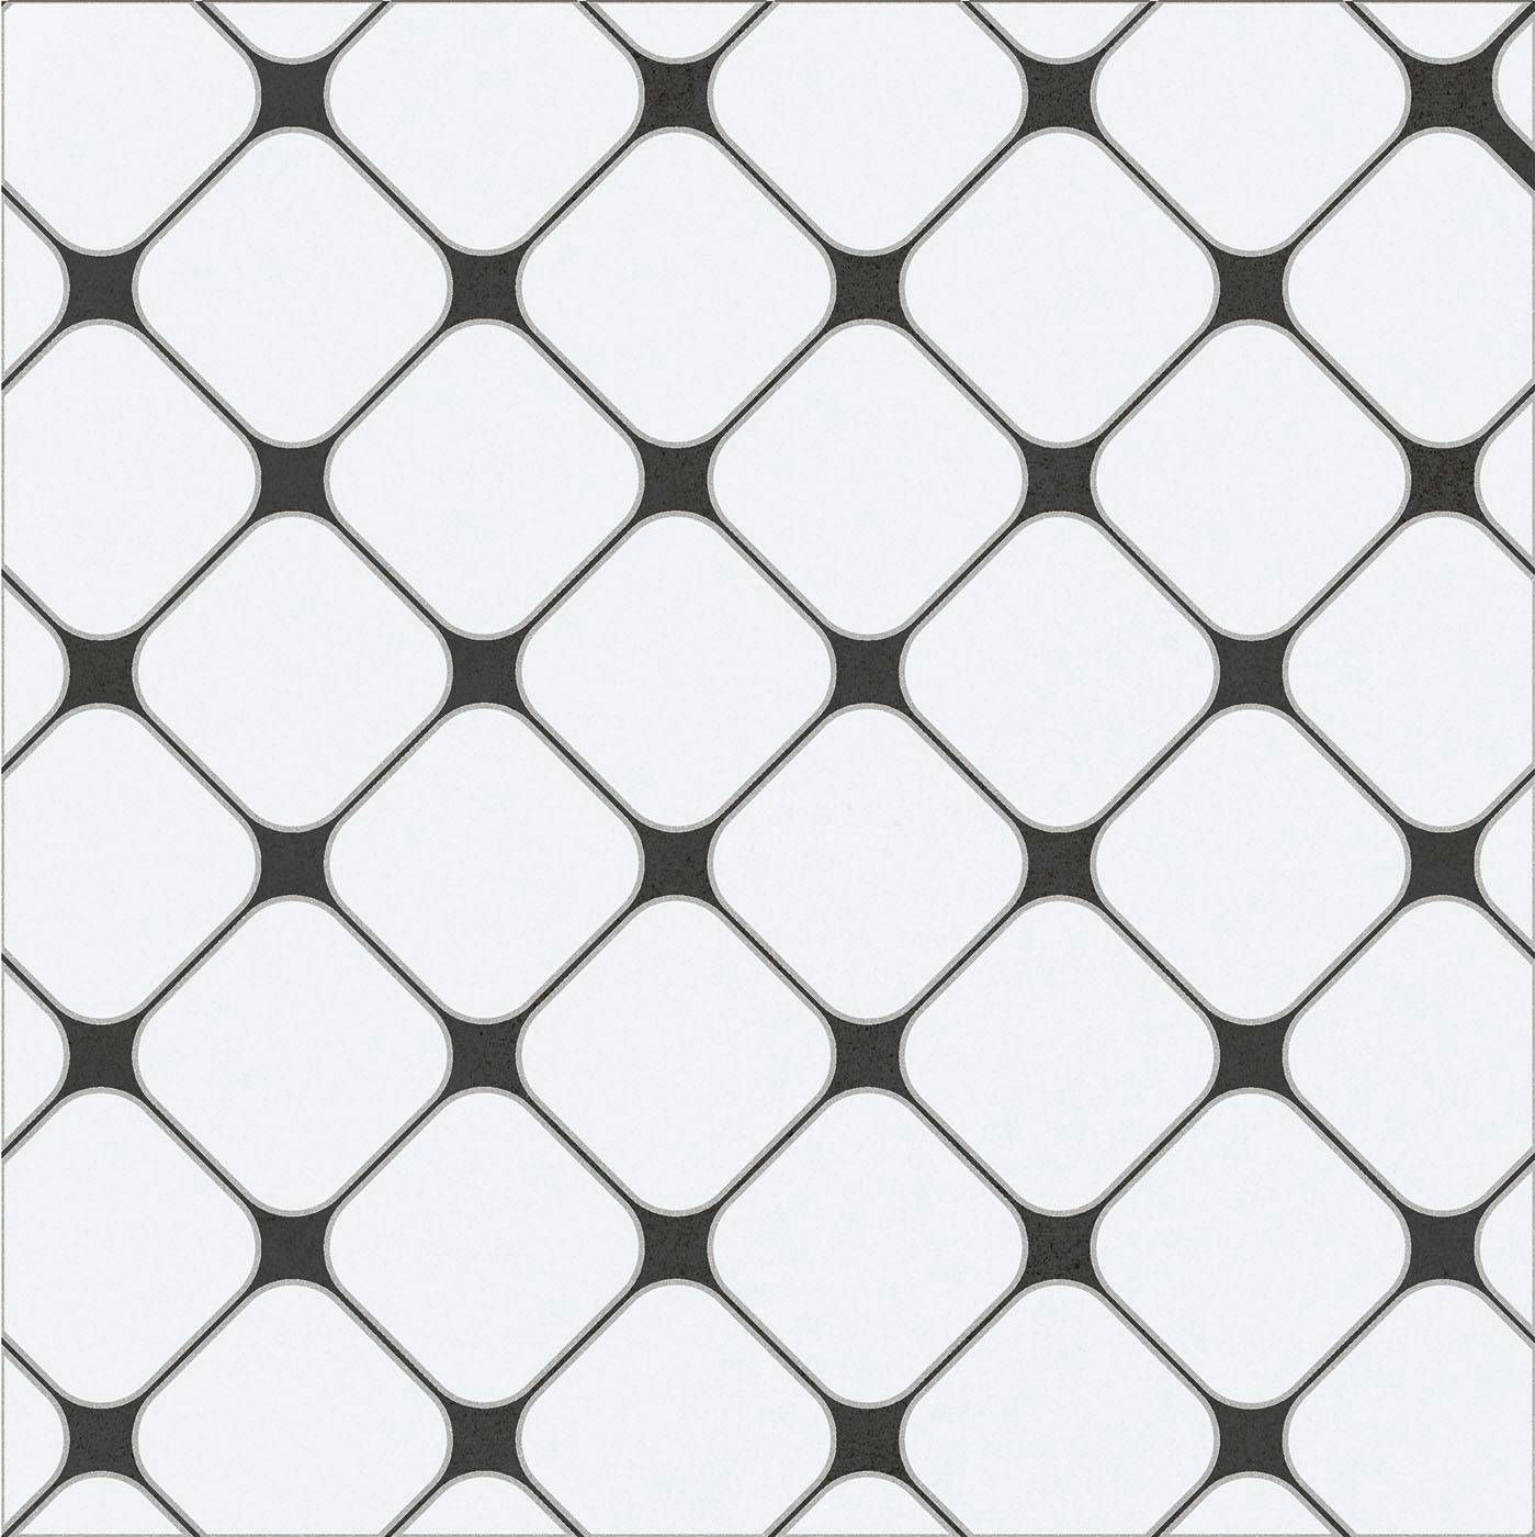 Havana Patch | Stones & More | Finest selection of Mosaics, Glass, Tile and Stone